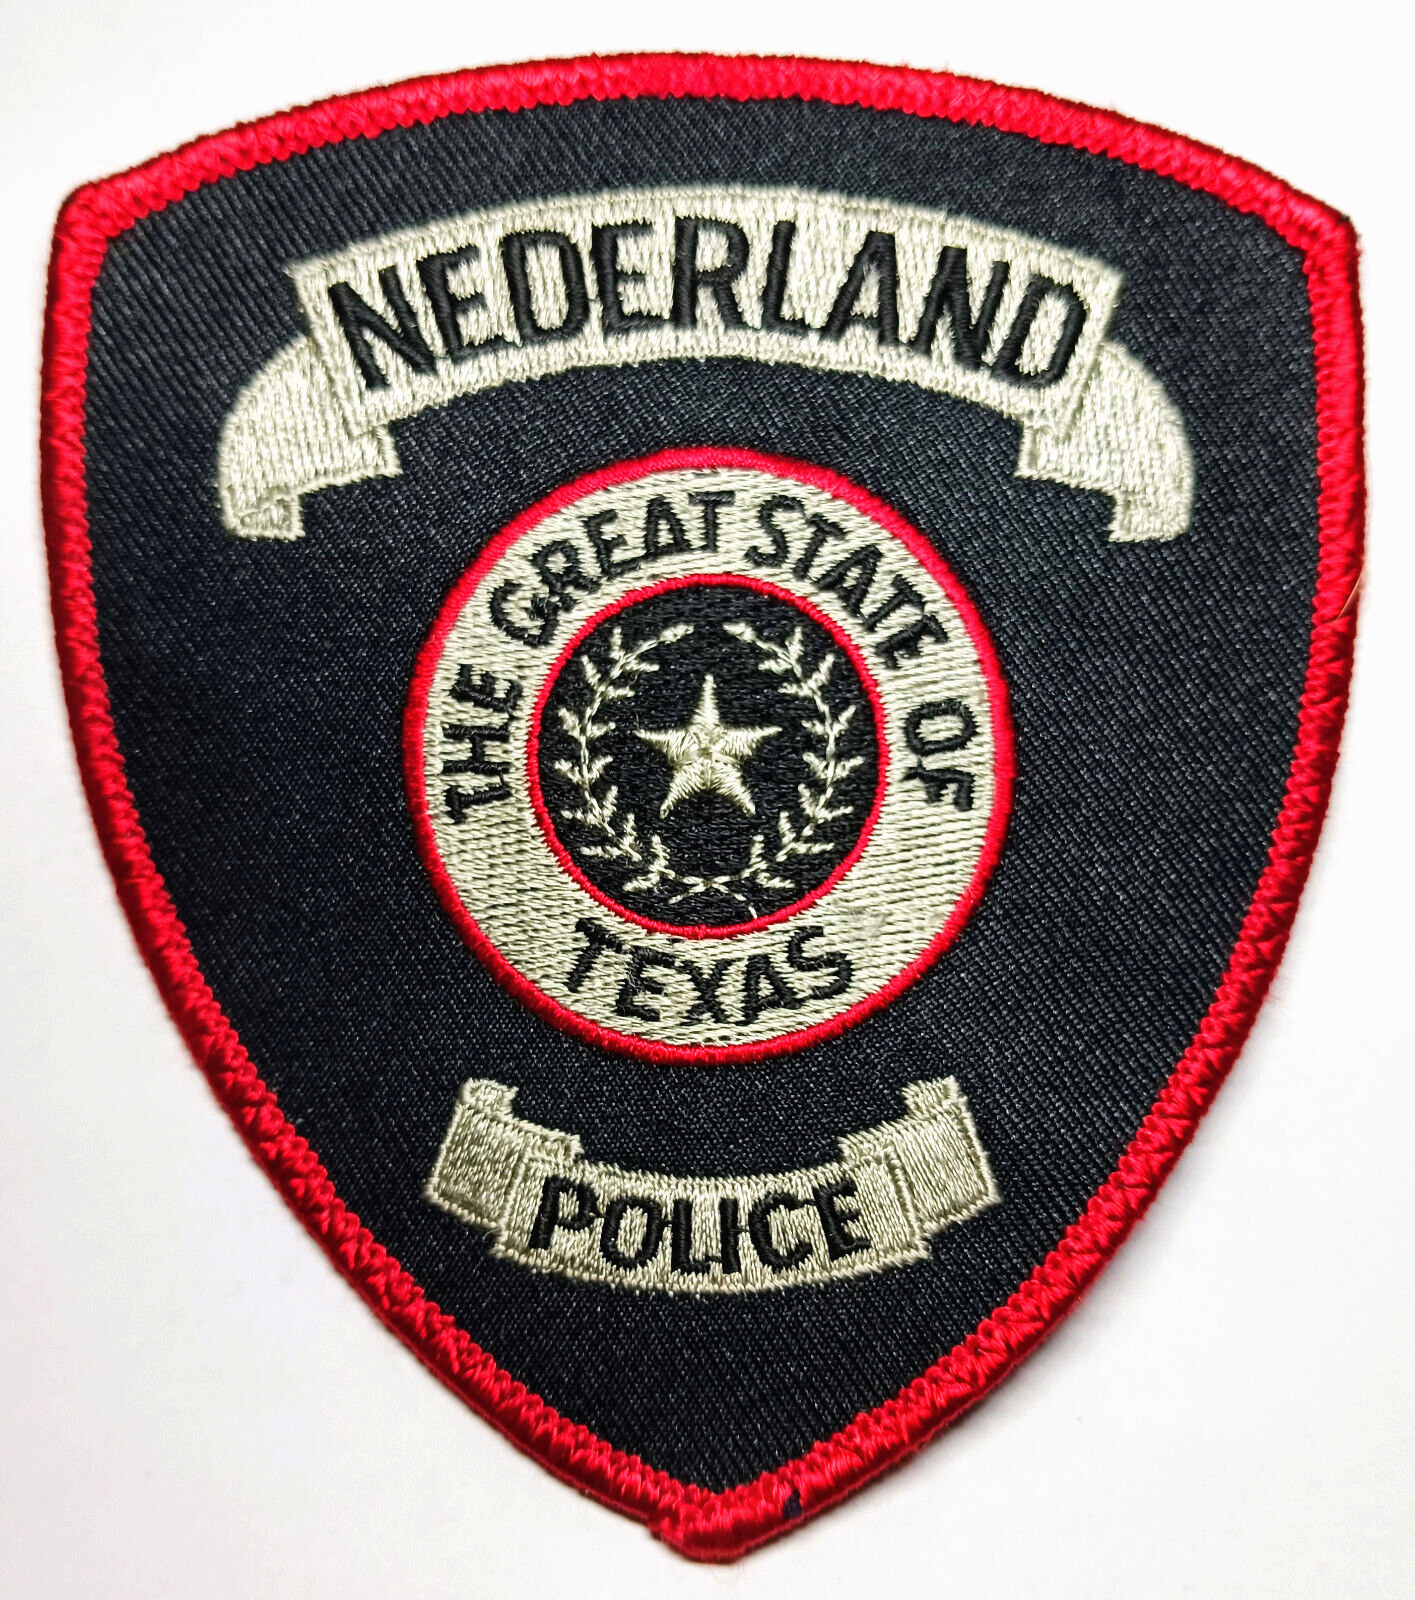 Nederland Texas Police Patch - FREE Tracked US Shipping 